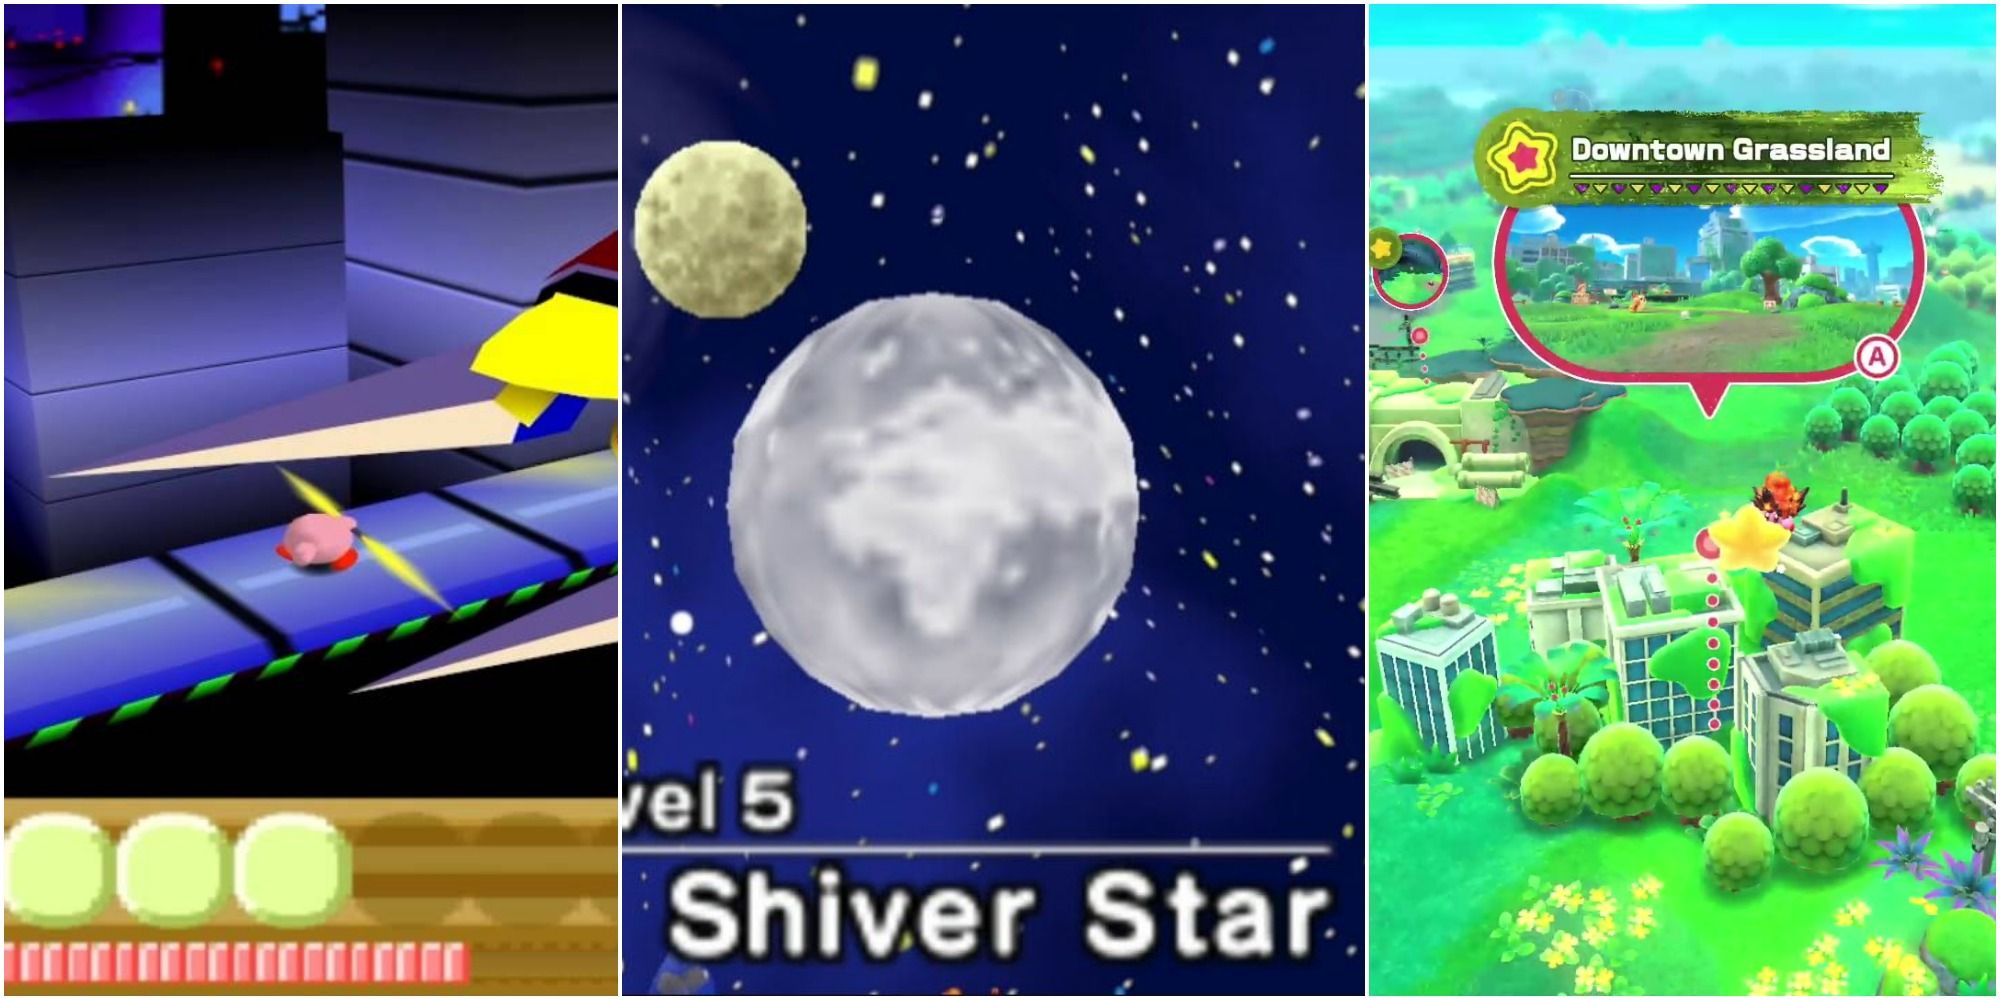 A split image from left to right: Kirby in Shiver Star city, Shiver Star planet, Downtown Grasslands in Forgotten Land